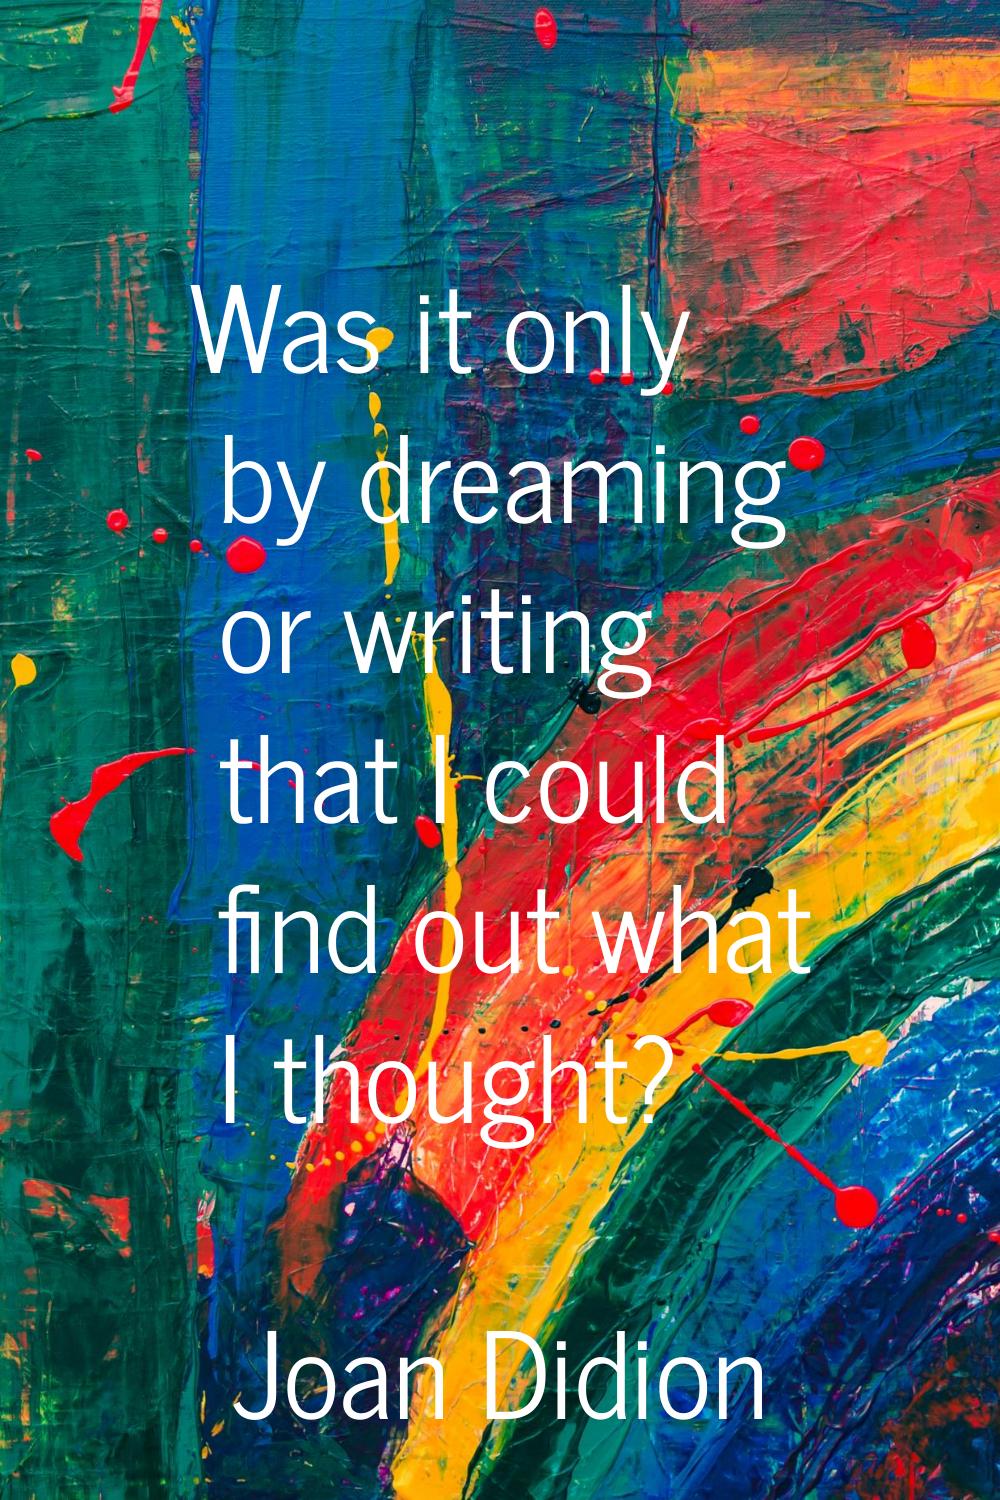 Was it only by dreaming or writing that I could find out what I thought?